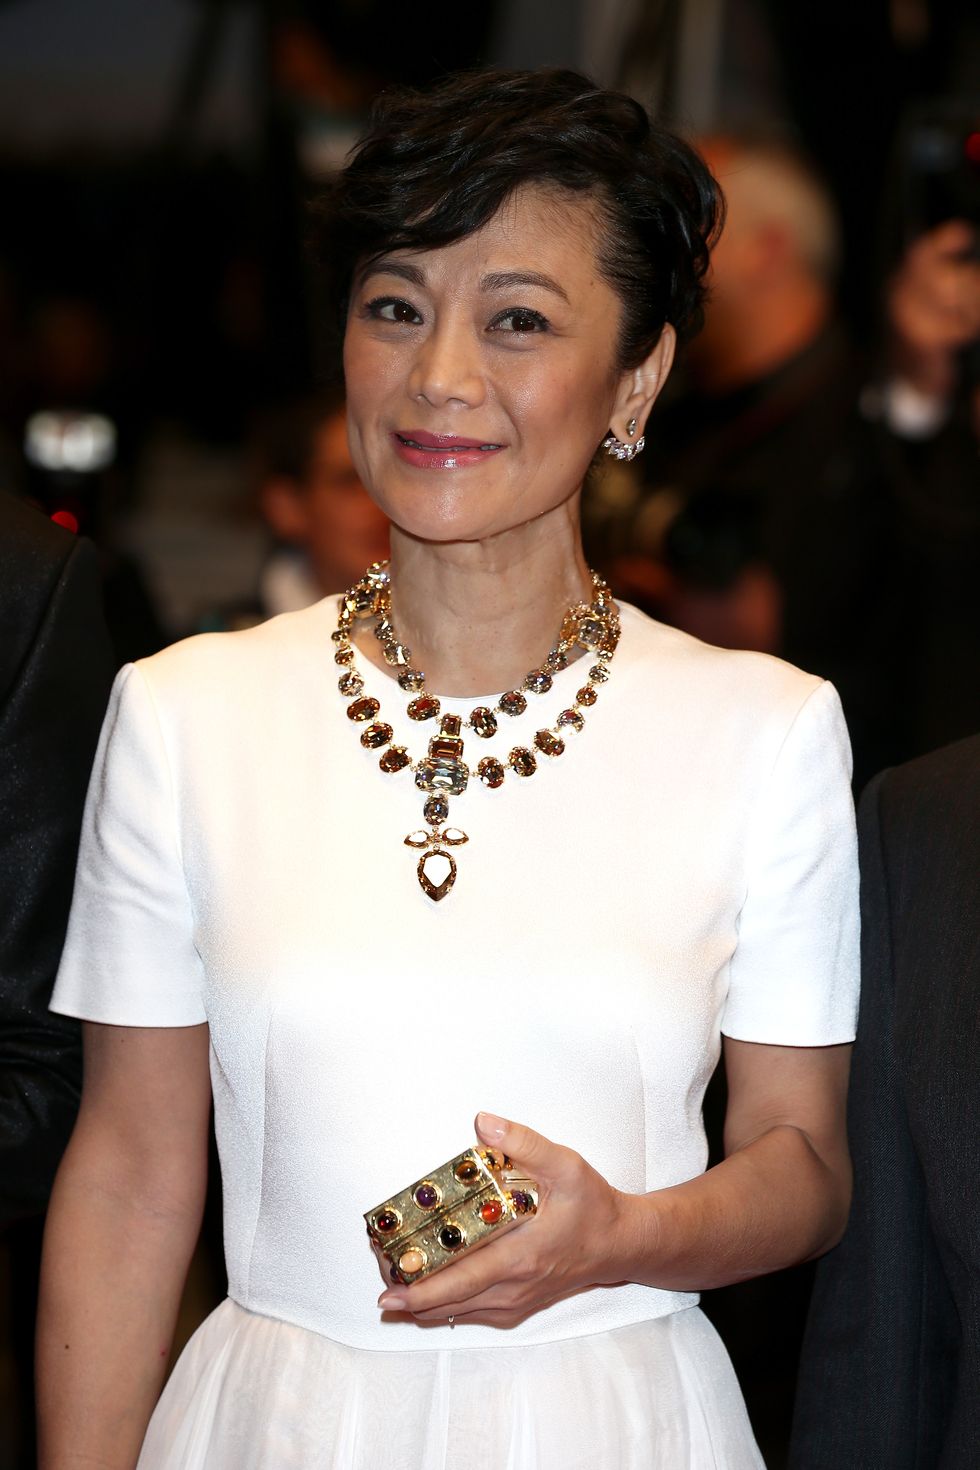 CANNES, FRANCE - MAY 20:  Sylvia Chang attends the Premiere of "Shan He Gu Ran" ("Mountains May Depart") during the 68th annual Cannes Film Festival on May 20, 2015 in Cannes, France.  (Photo by Andreas Rentz/Getty Images)